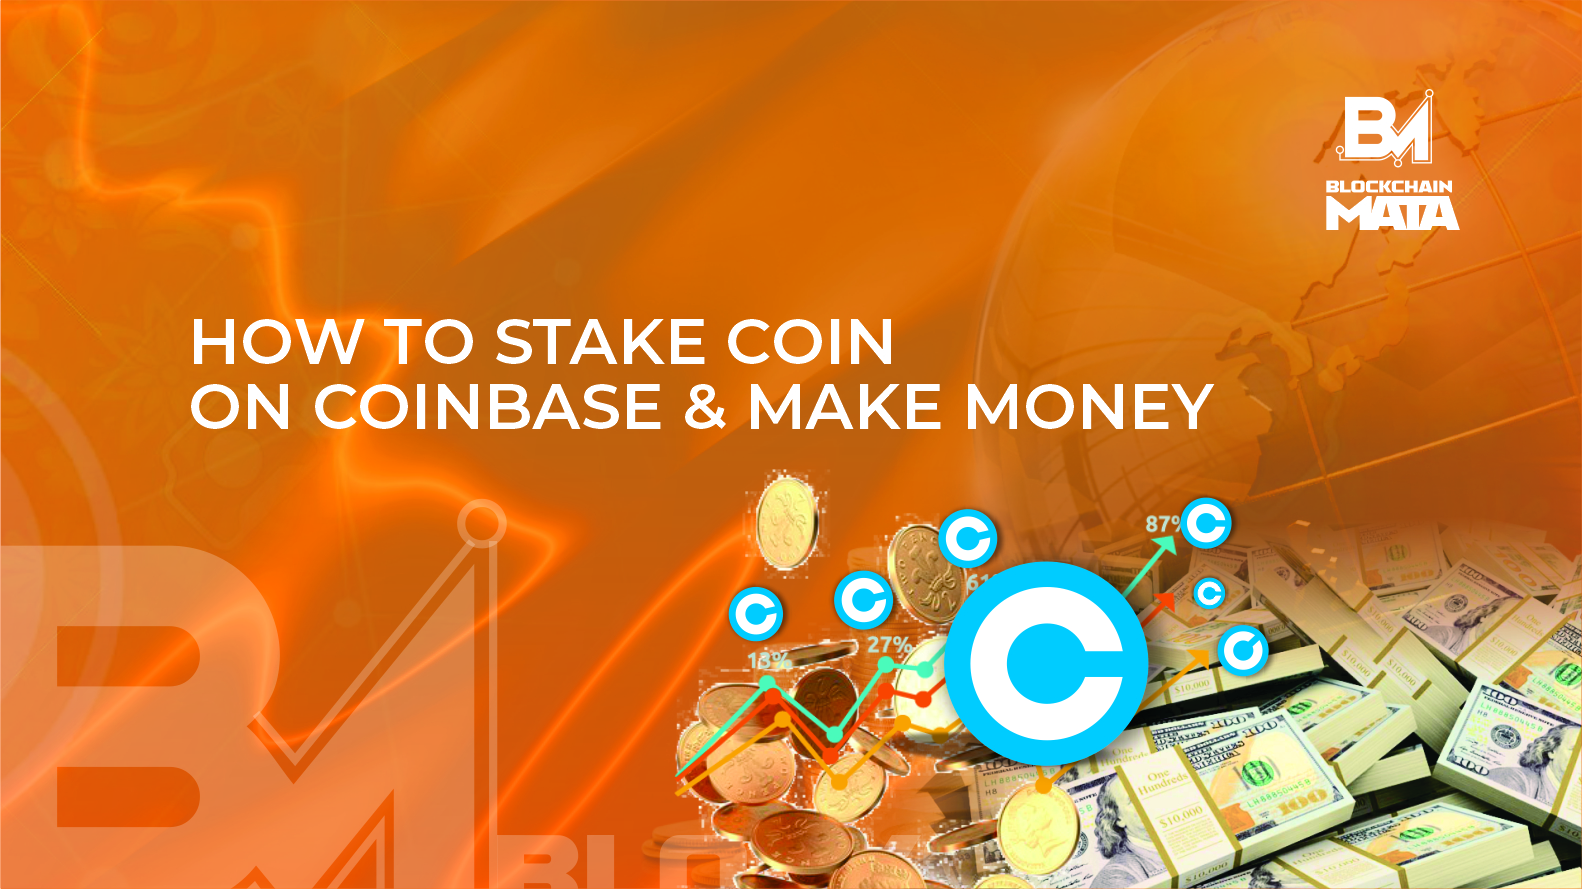 How to stake coin on Coinbase